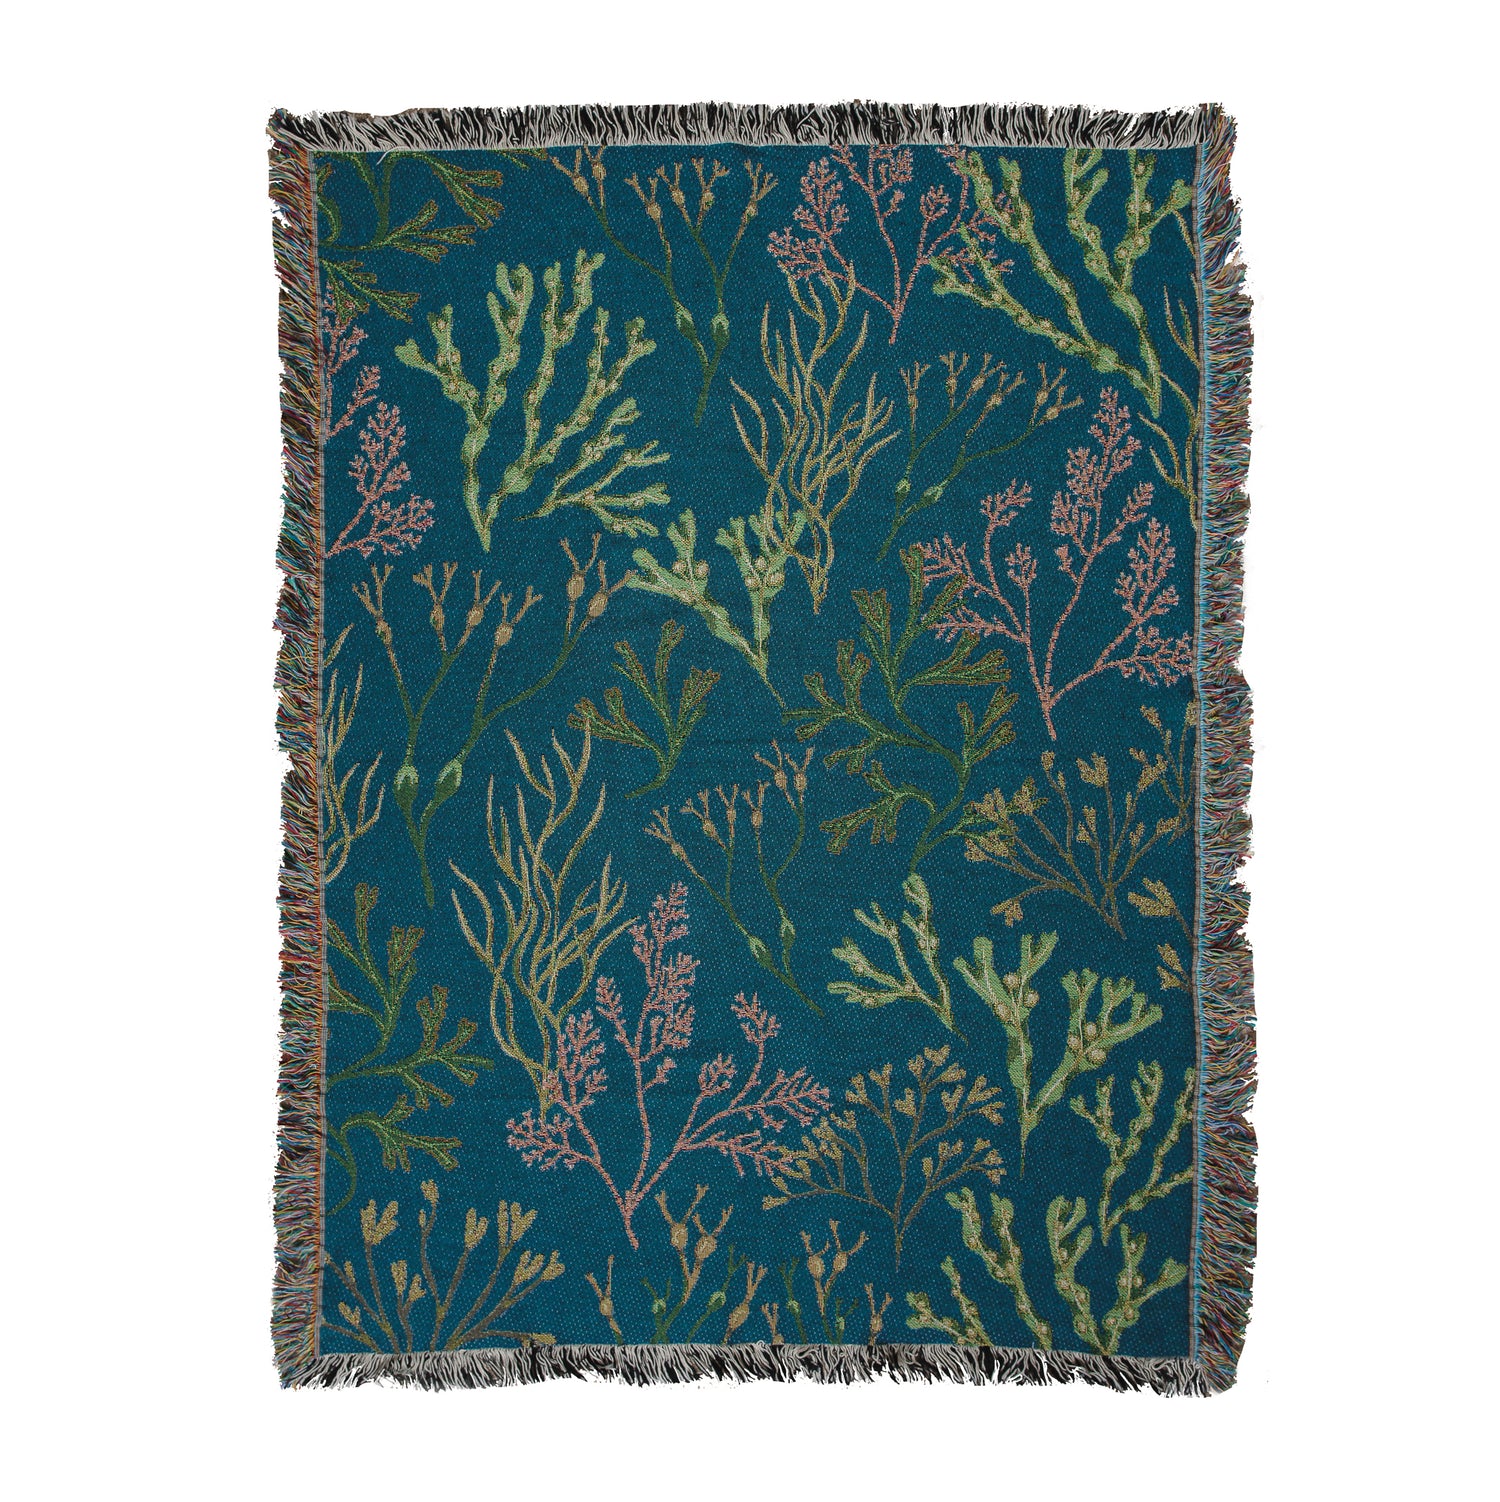 delicate design of seaweed on Intertidal Wrap woven blanket by Arcana